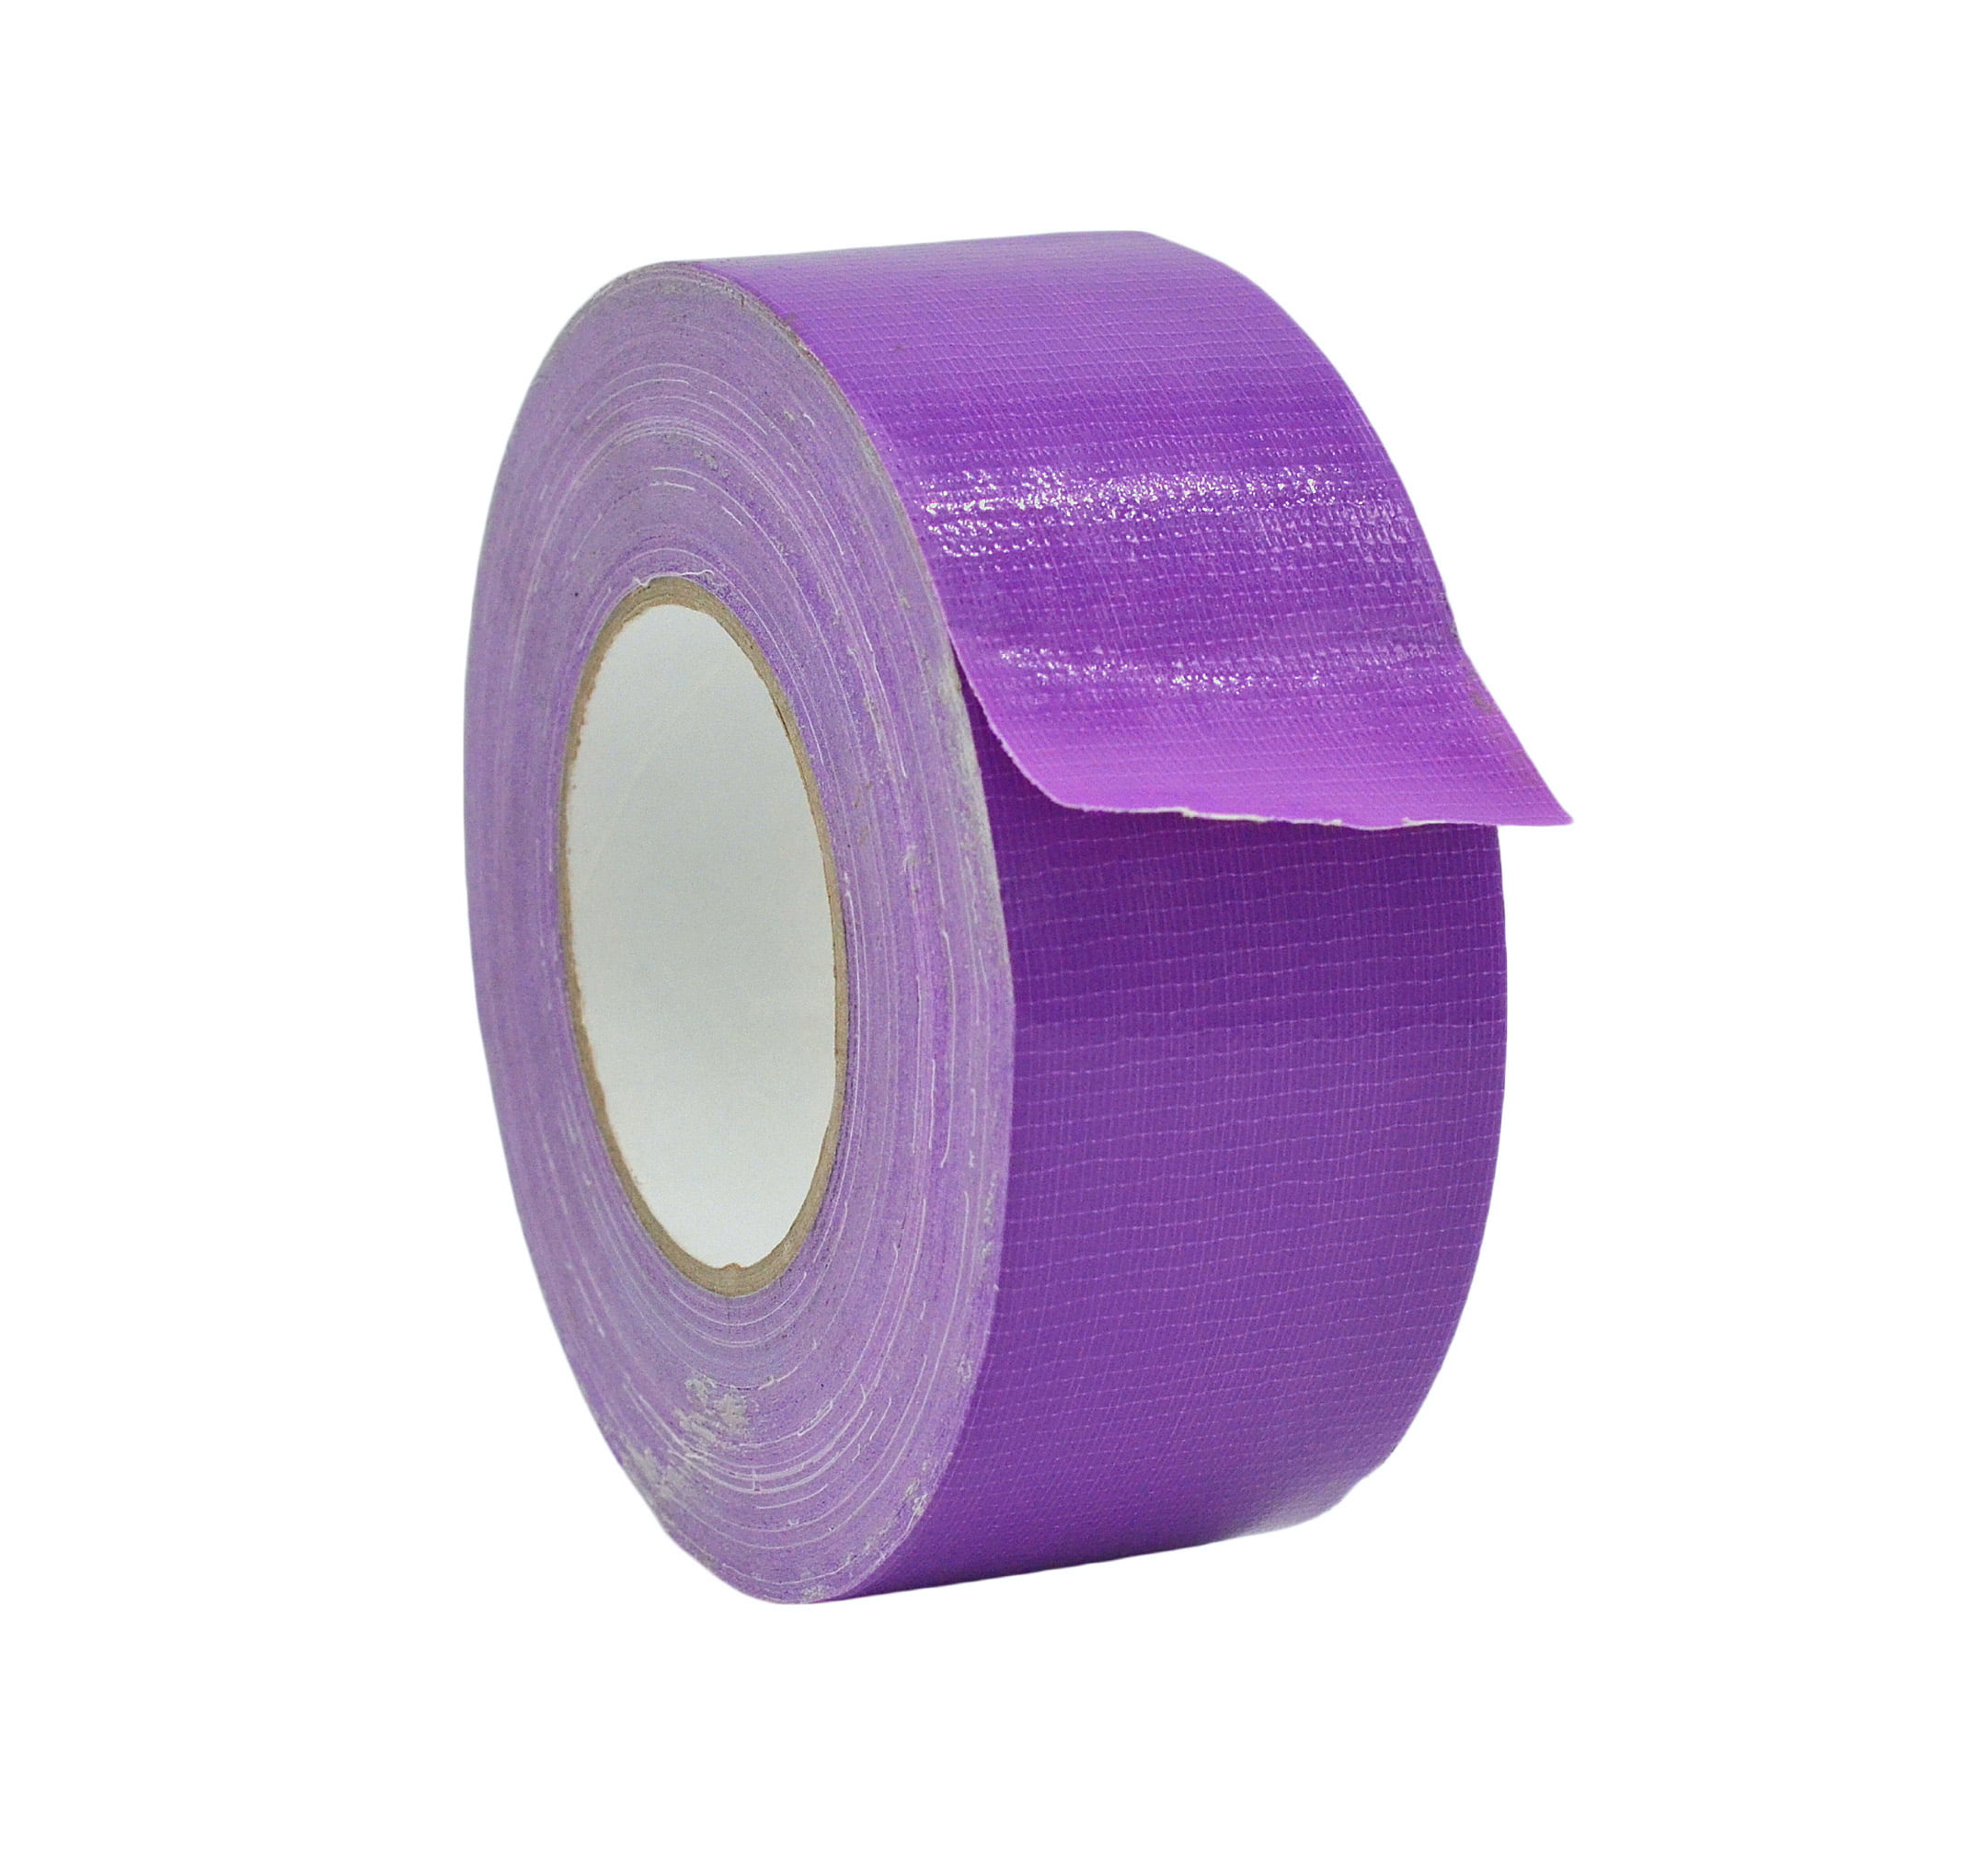 Waterproof and UV Resistant Industrial Grade Yellow Duct Tape 2" x 60yds 